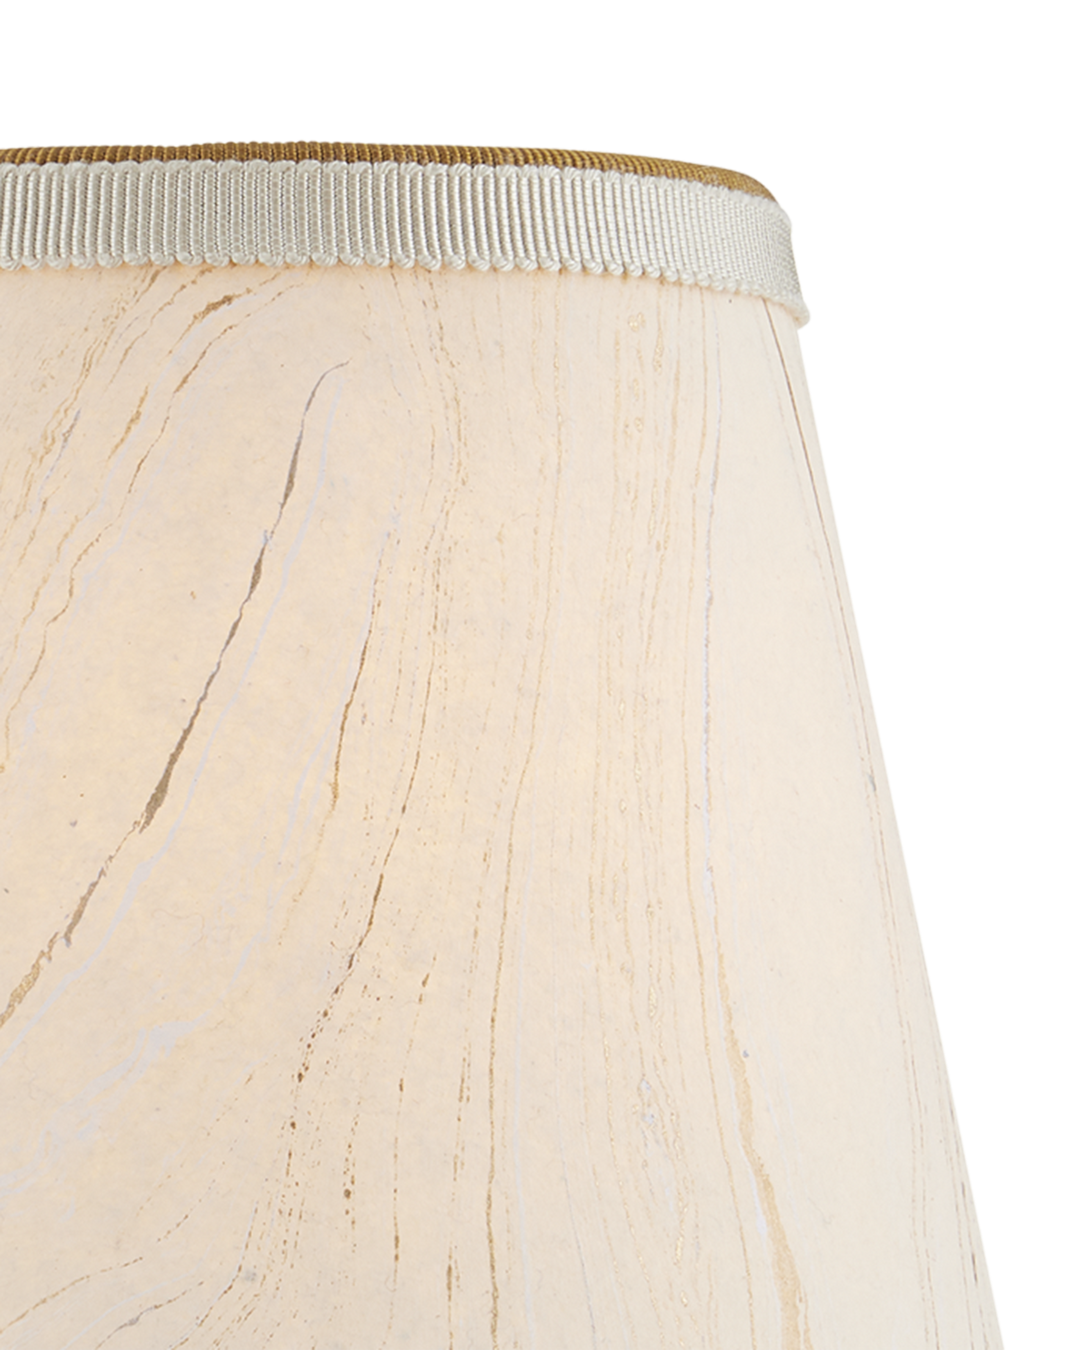 Marble Cream Paper Tapered Chandelier Shade